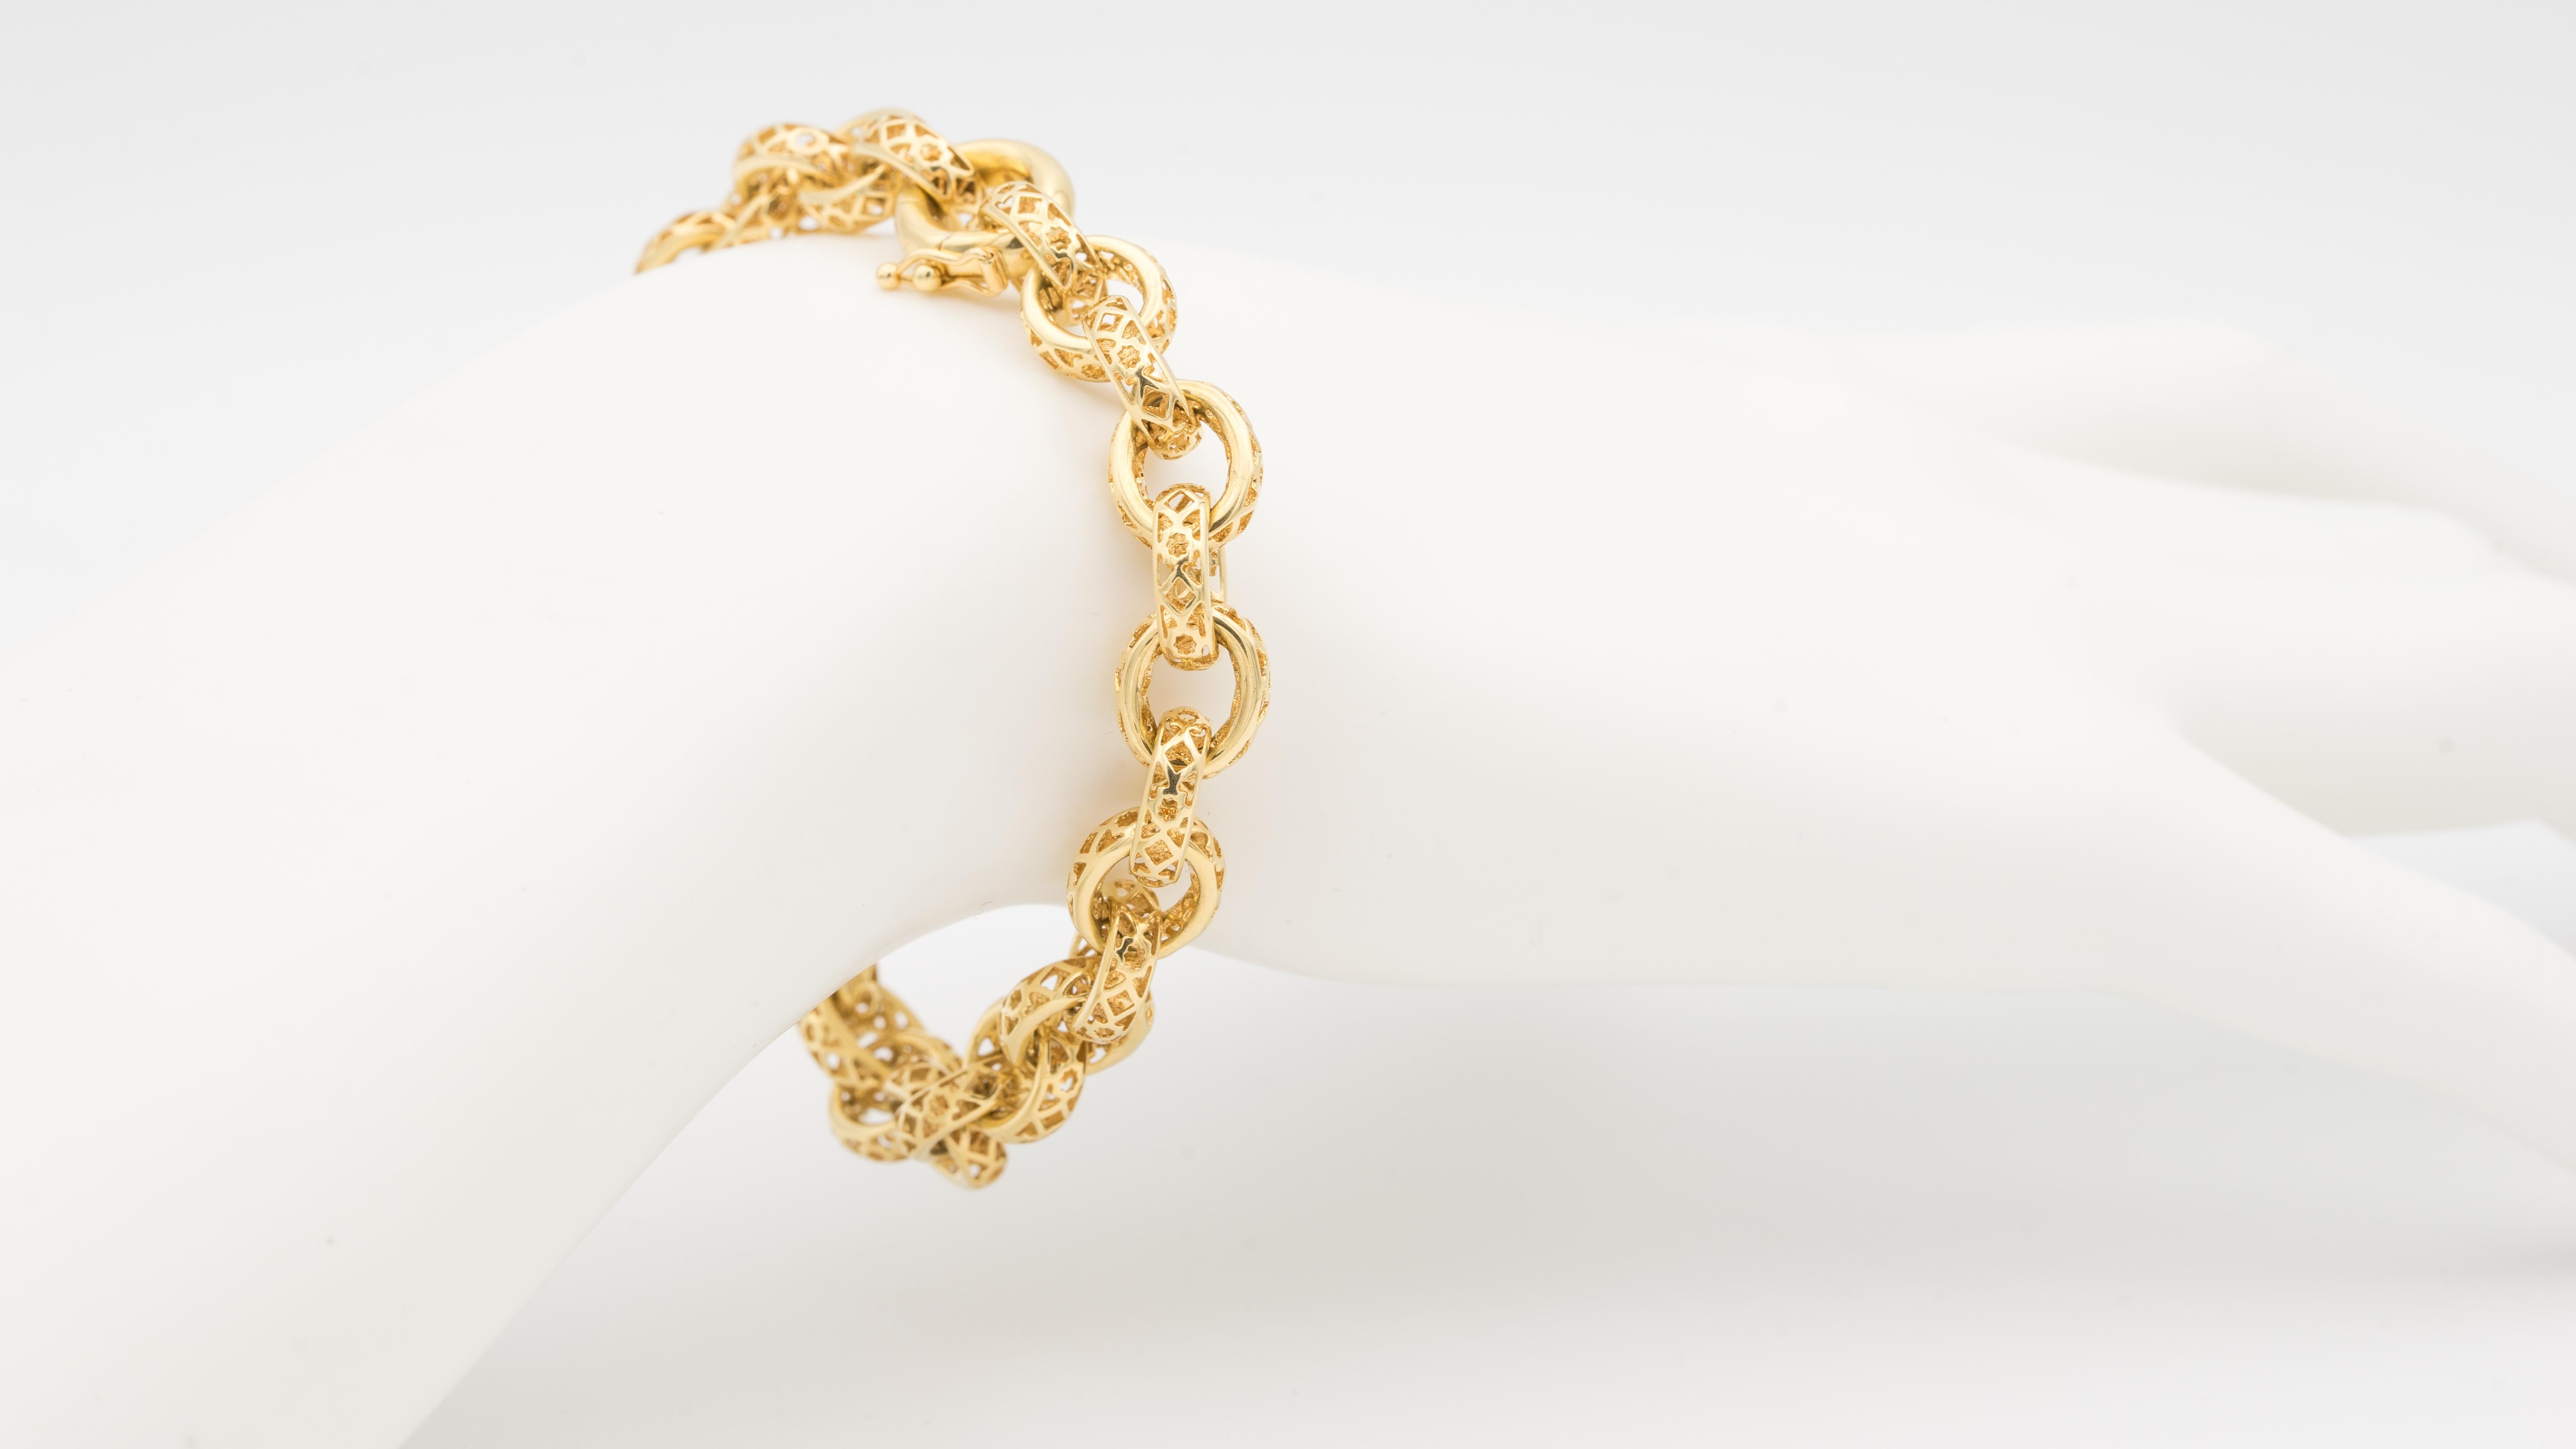 Paloma Picasso Marrakesh Bracelet for Tiffany & Co in 18K yellow gold 

Designer: Paloma Picasso
Brand: Tiffany & Co. 
Weight: 22 Grams
Length: 7.6 Inches
Signed: Paloma Picasso Tiffany & Co
Stamped: AU 750 ITALY
Condition: Pre-Owned, Minor